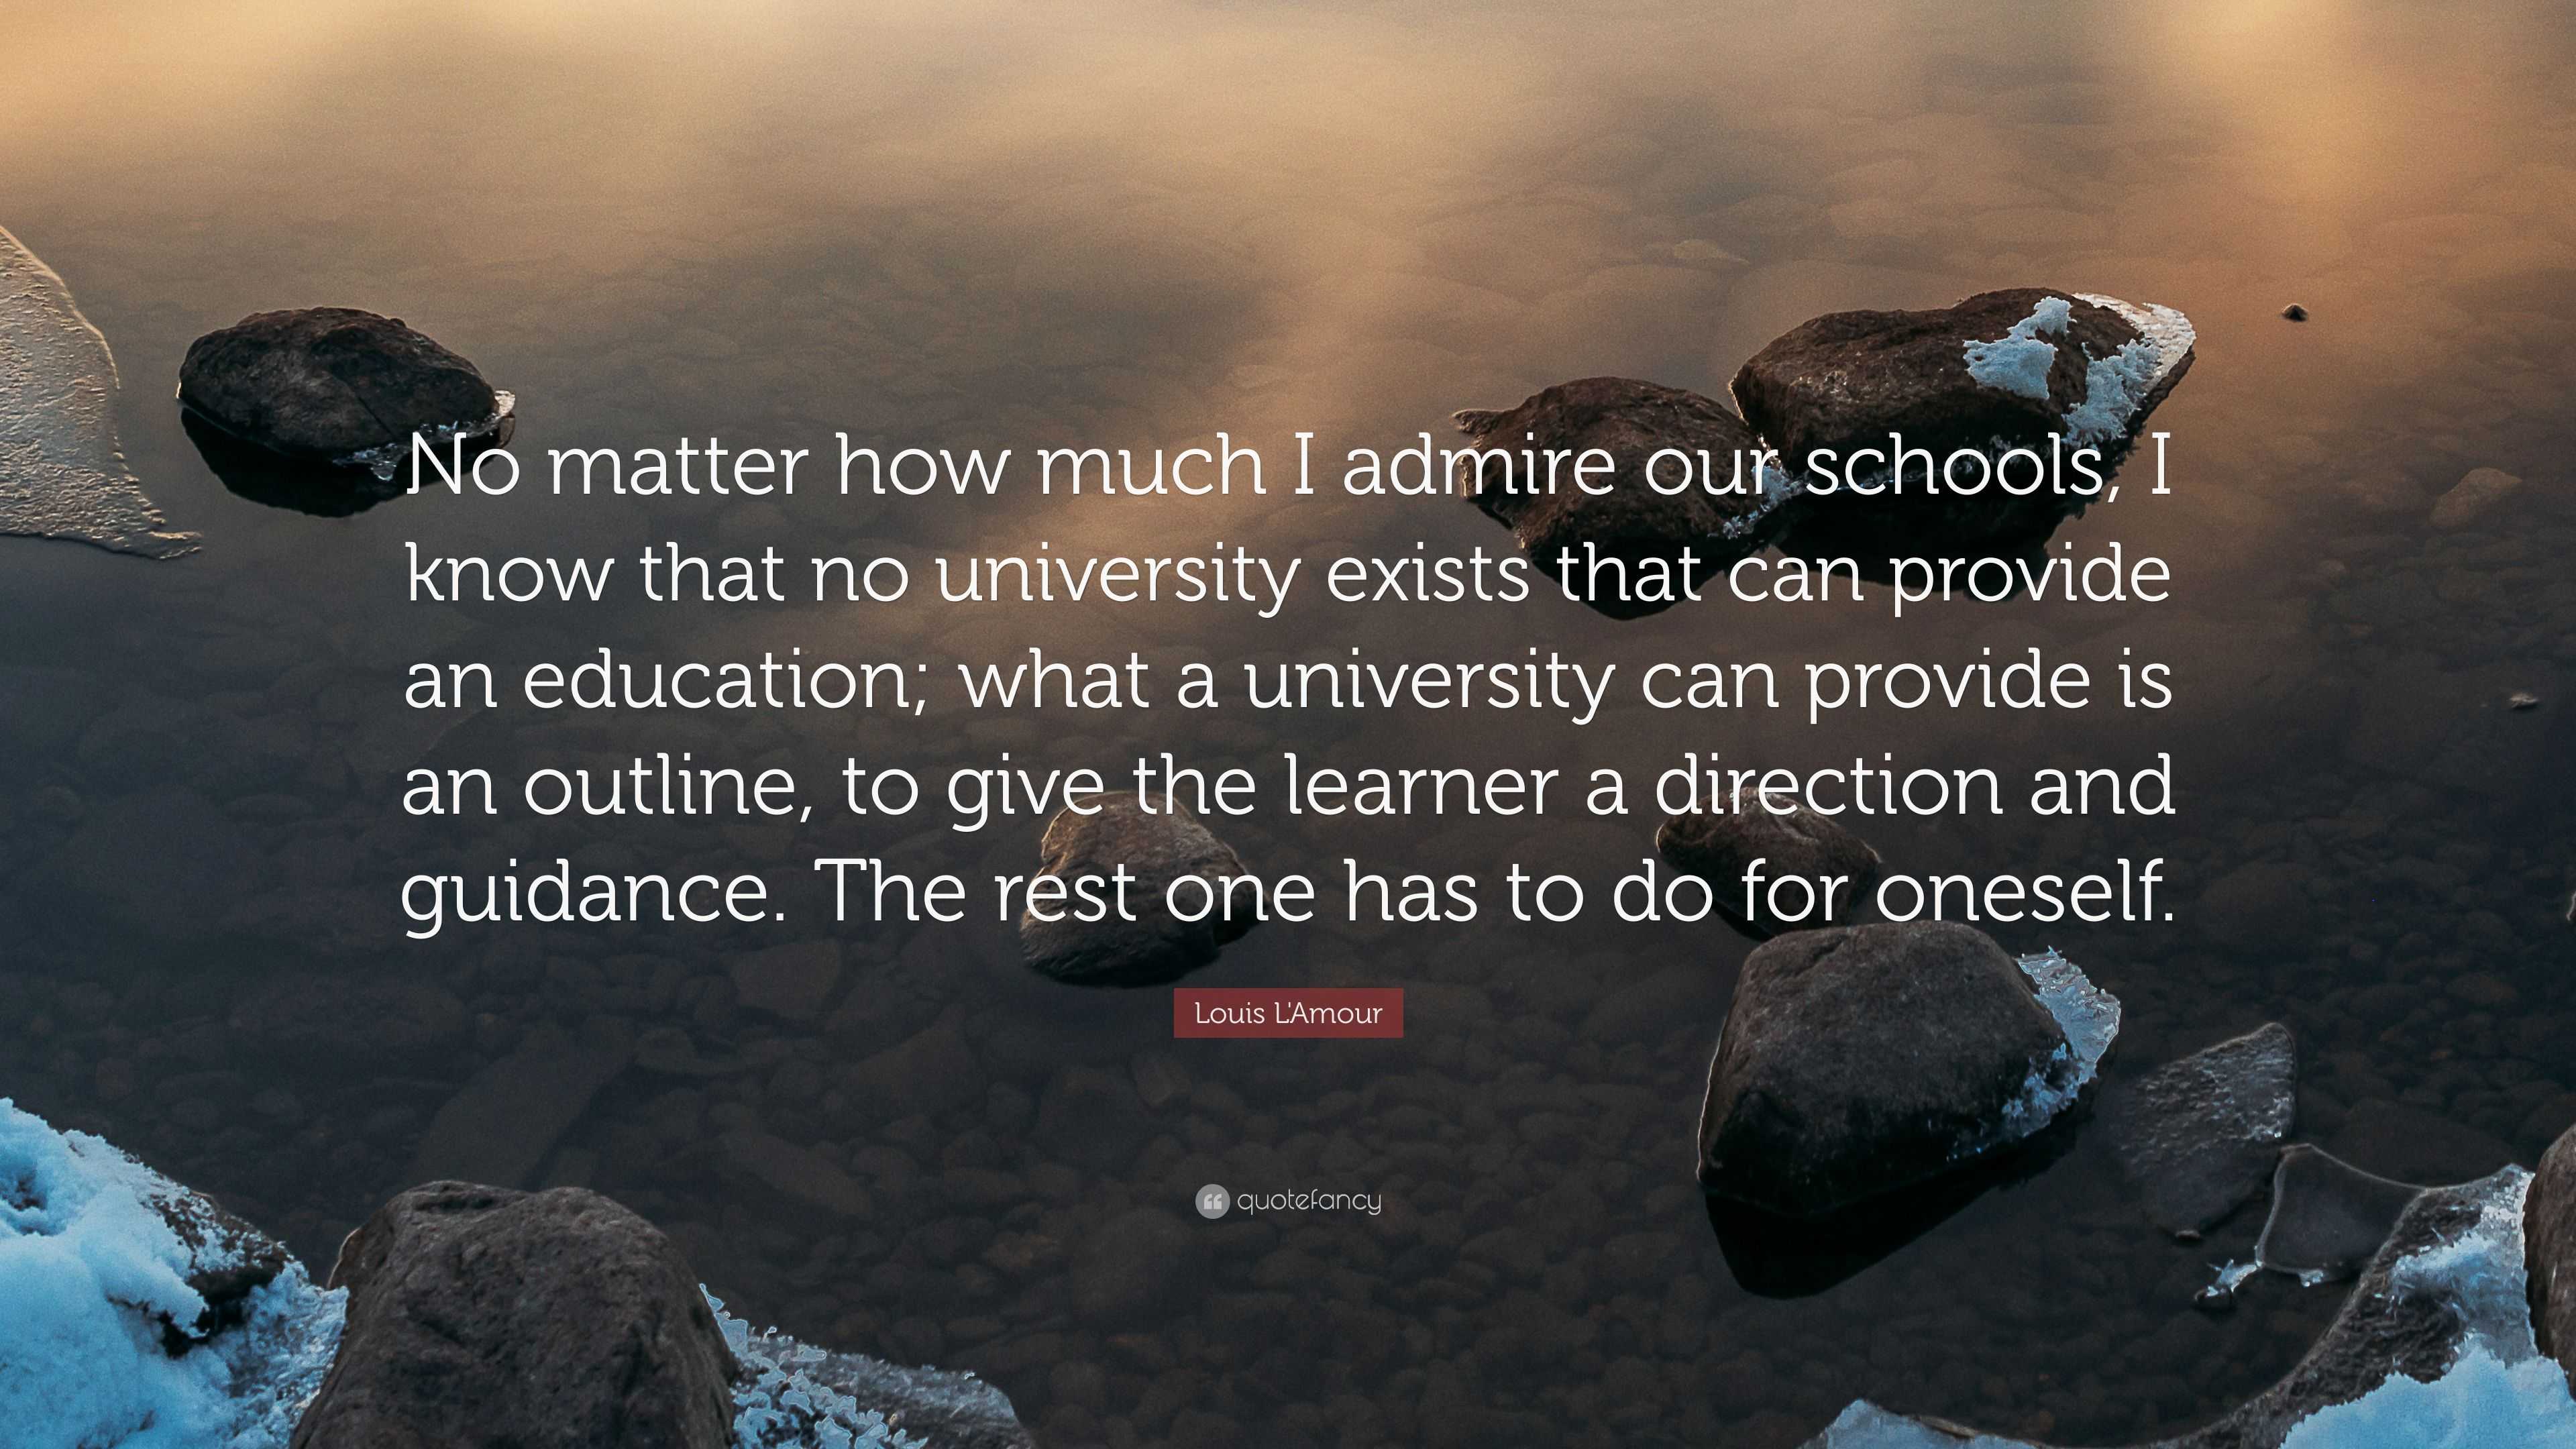 Louis L&#39;Amour Quote: “No matter how much I admire our schools, I know that no university exists ...